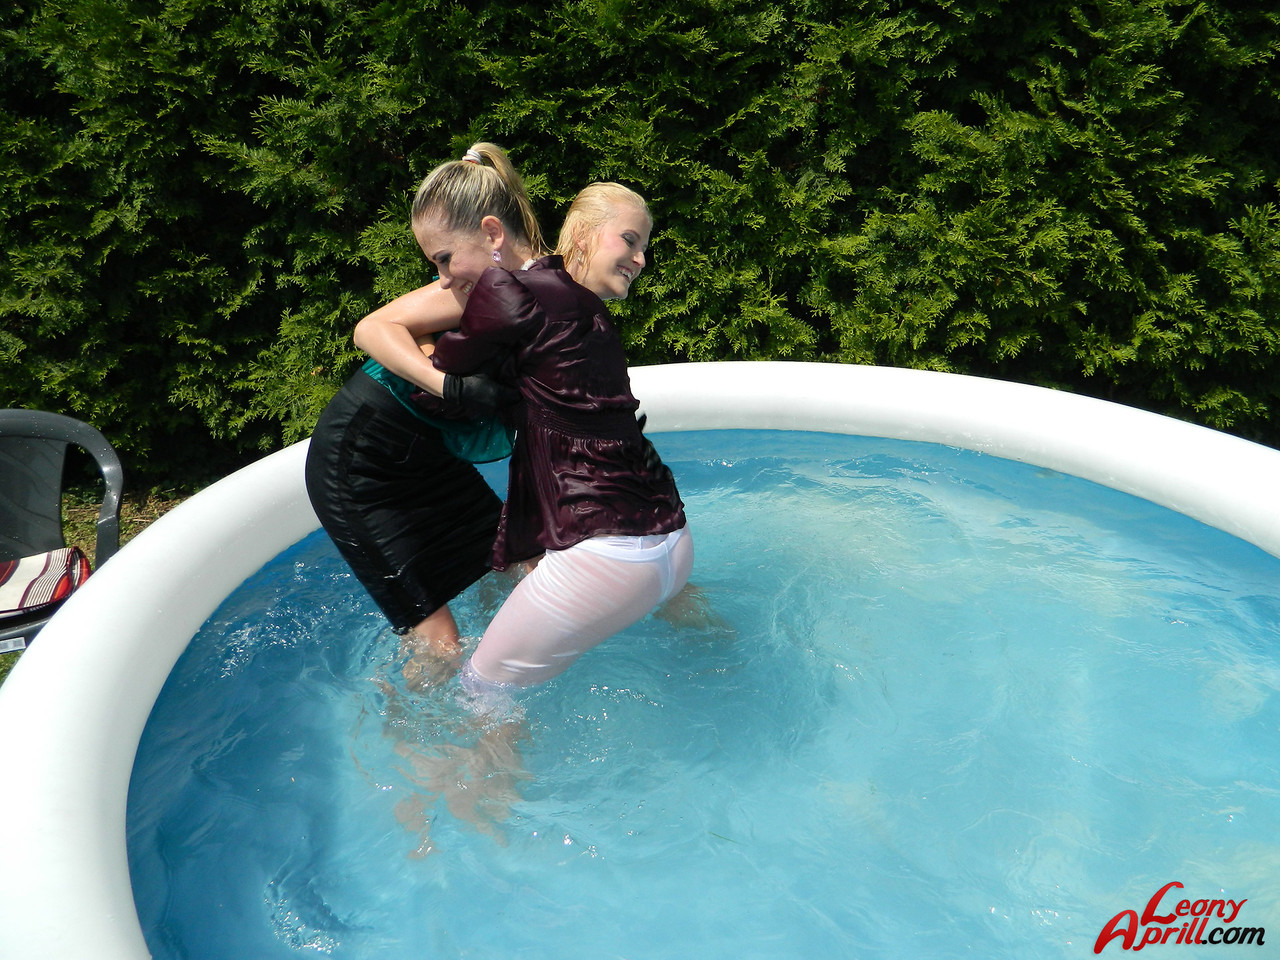 Clothed lesbians get soaking wet after getting into an above-ground pool порно фото #428457822 | Leony Aprill Pics, Lesbian, мобильное порно